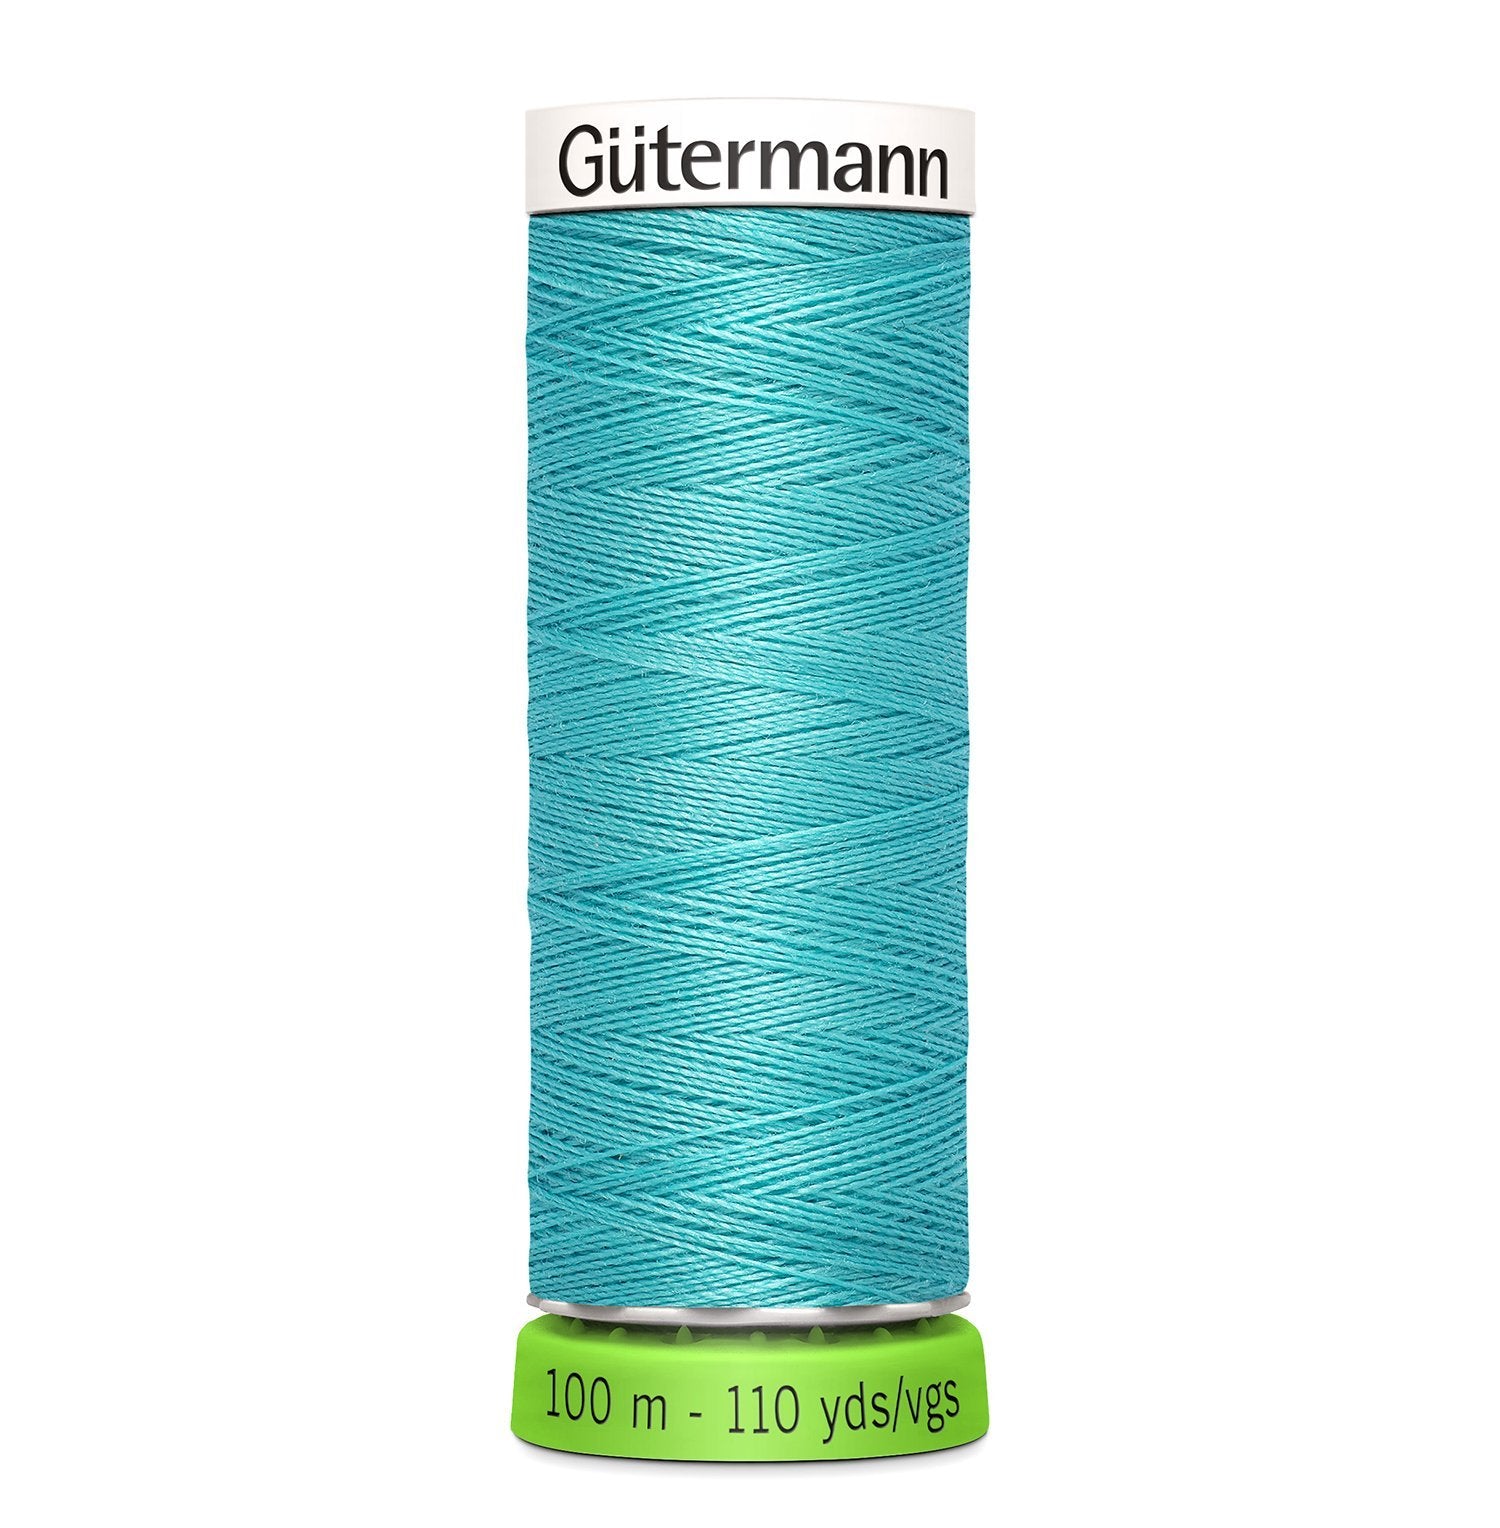 Gutermann Recycled Thread 100m, Colour 192 from Jaycotts Sewing Supplies